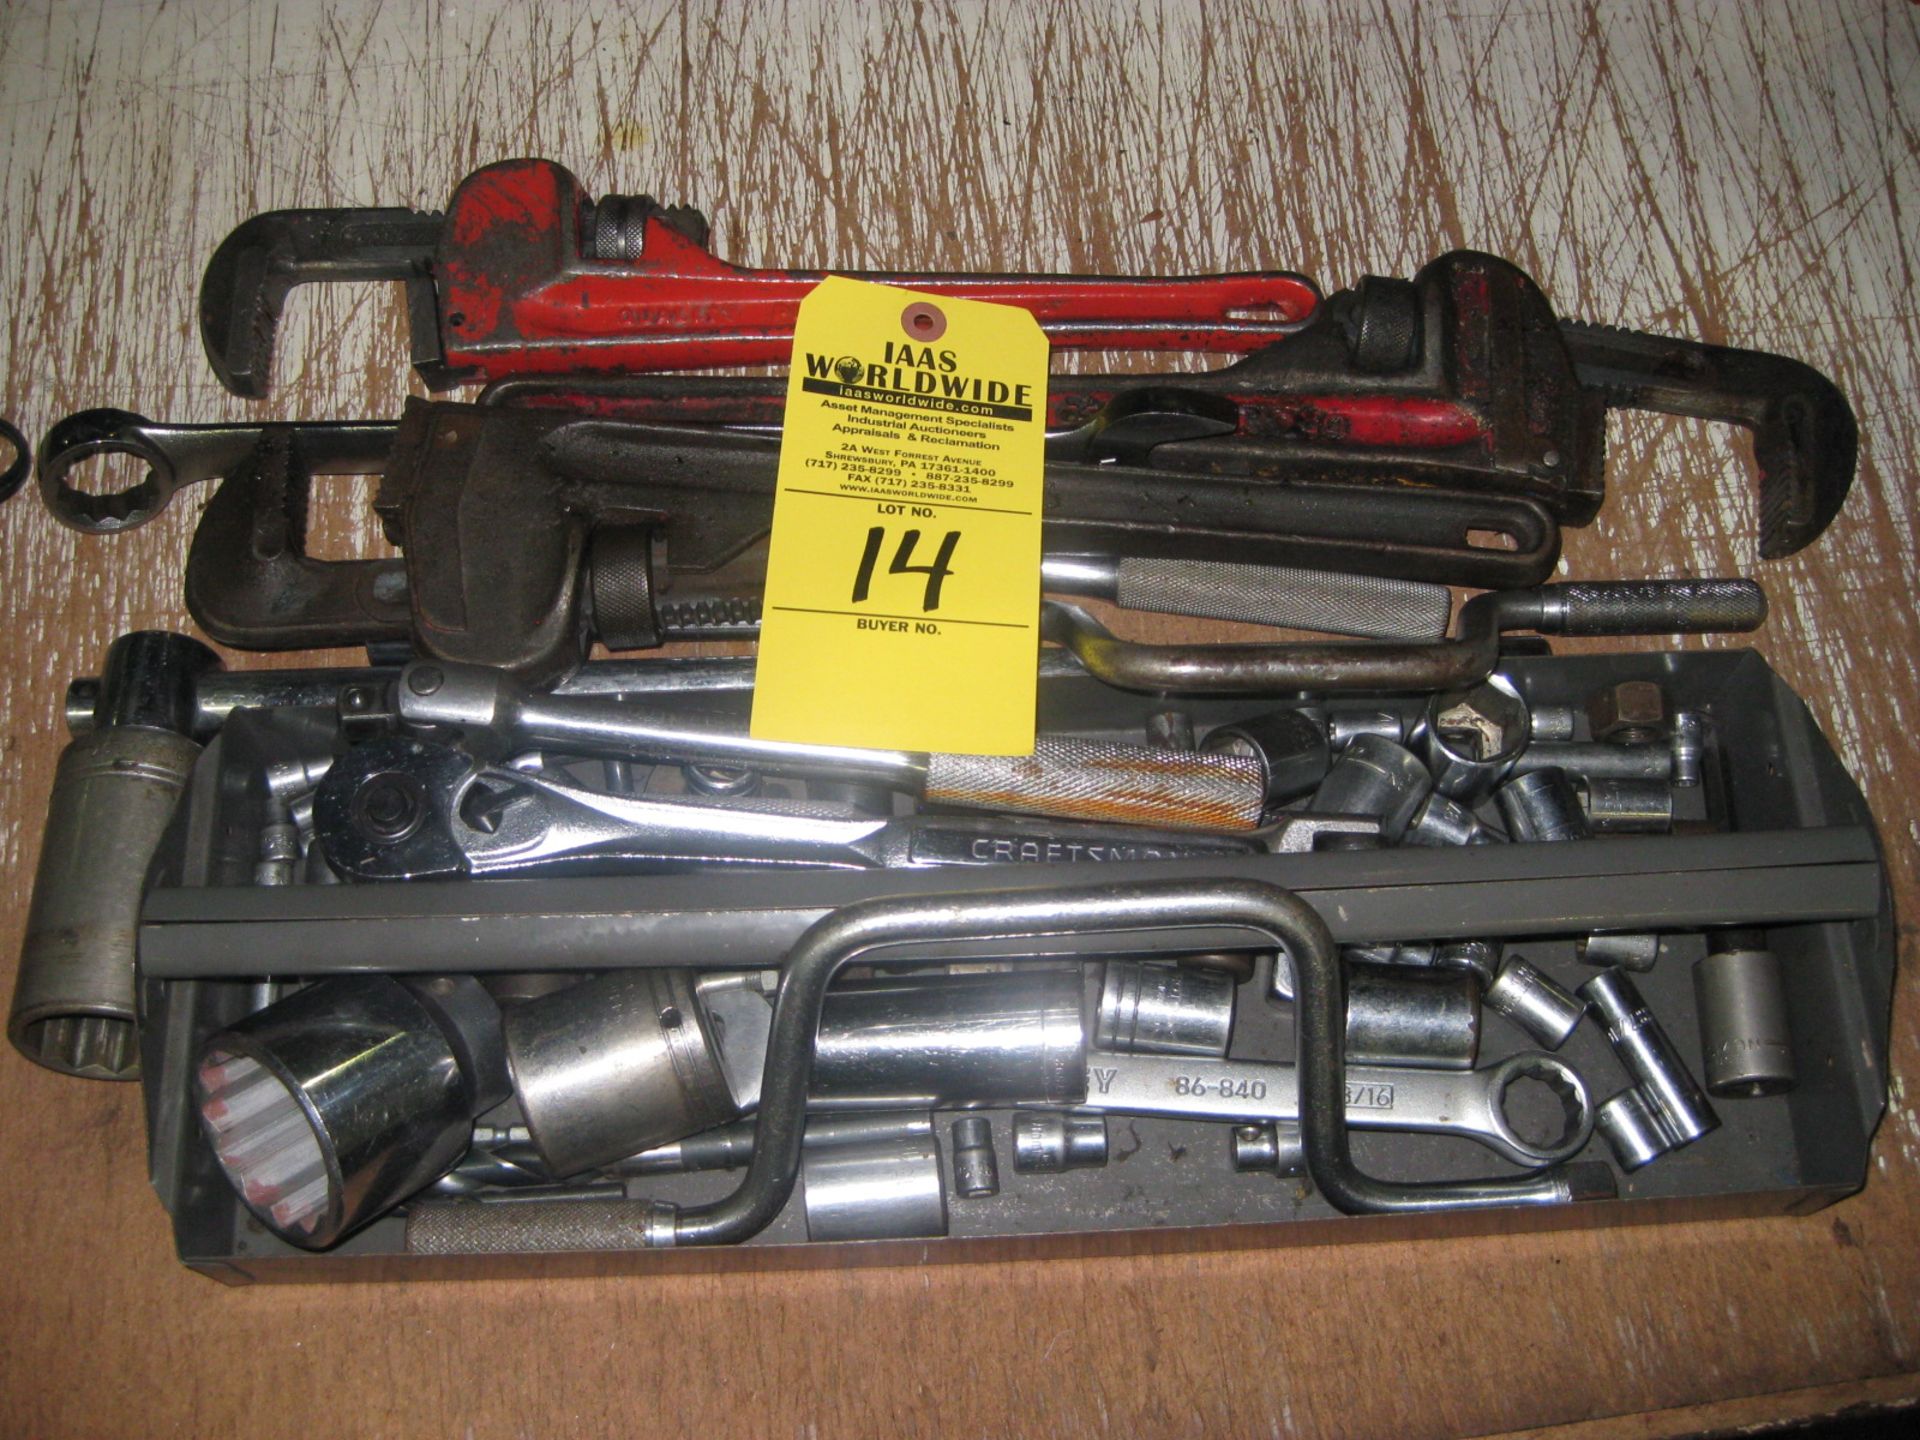 LOT OF MISCELLANEOUS WRENCHES